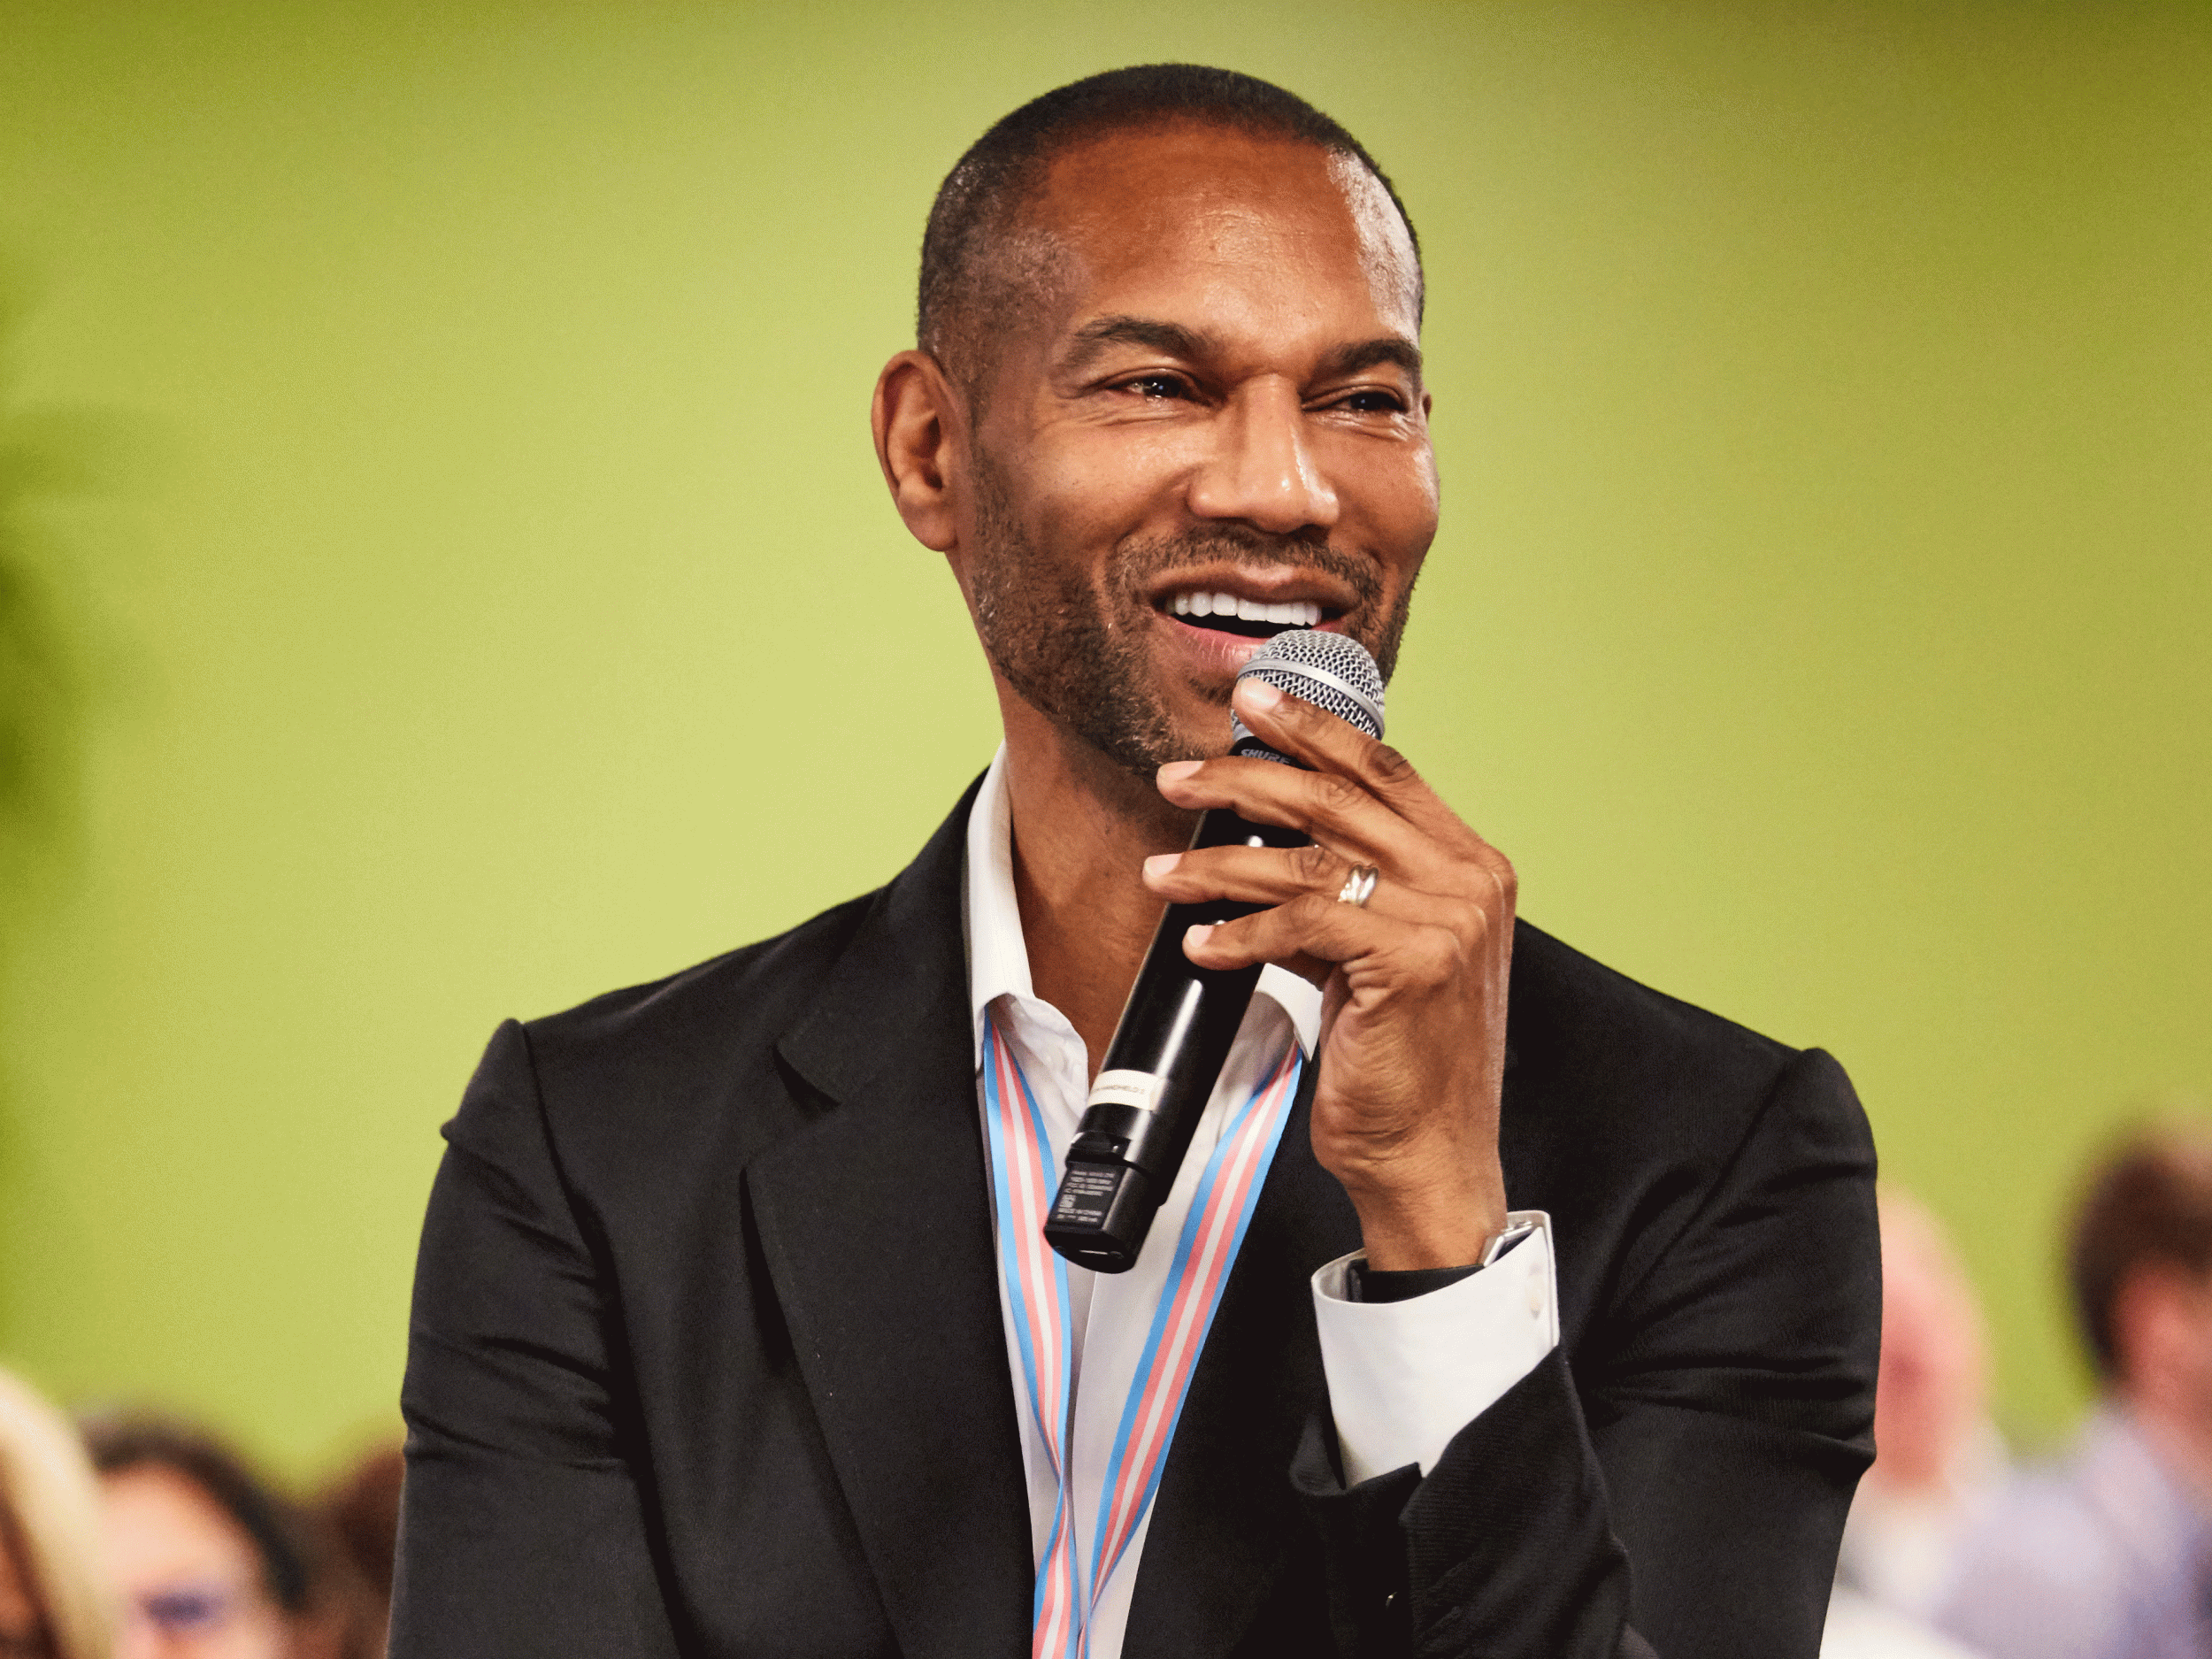 Tony Prophet jumps at the opportunity to talk about issues that are still tragically considered a taboo in many corporate circles